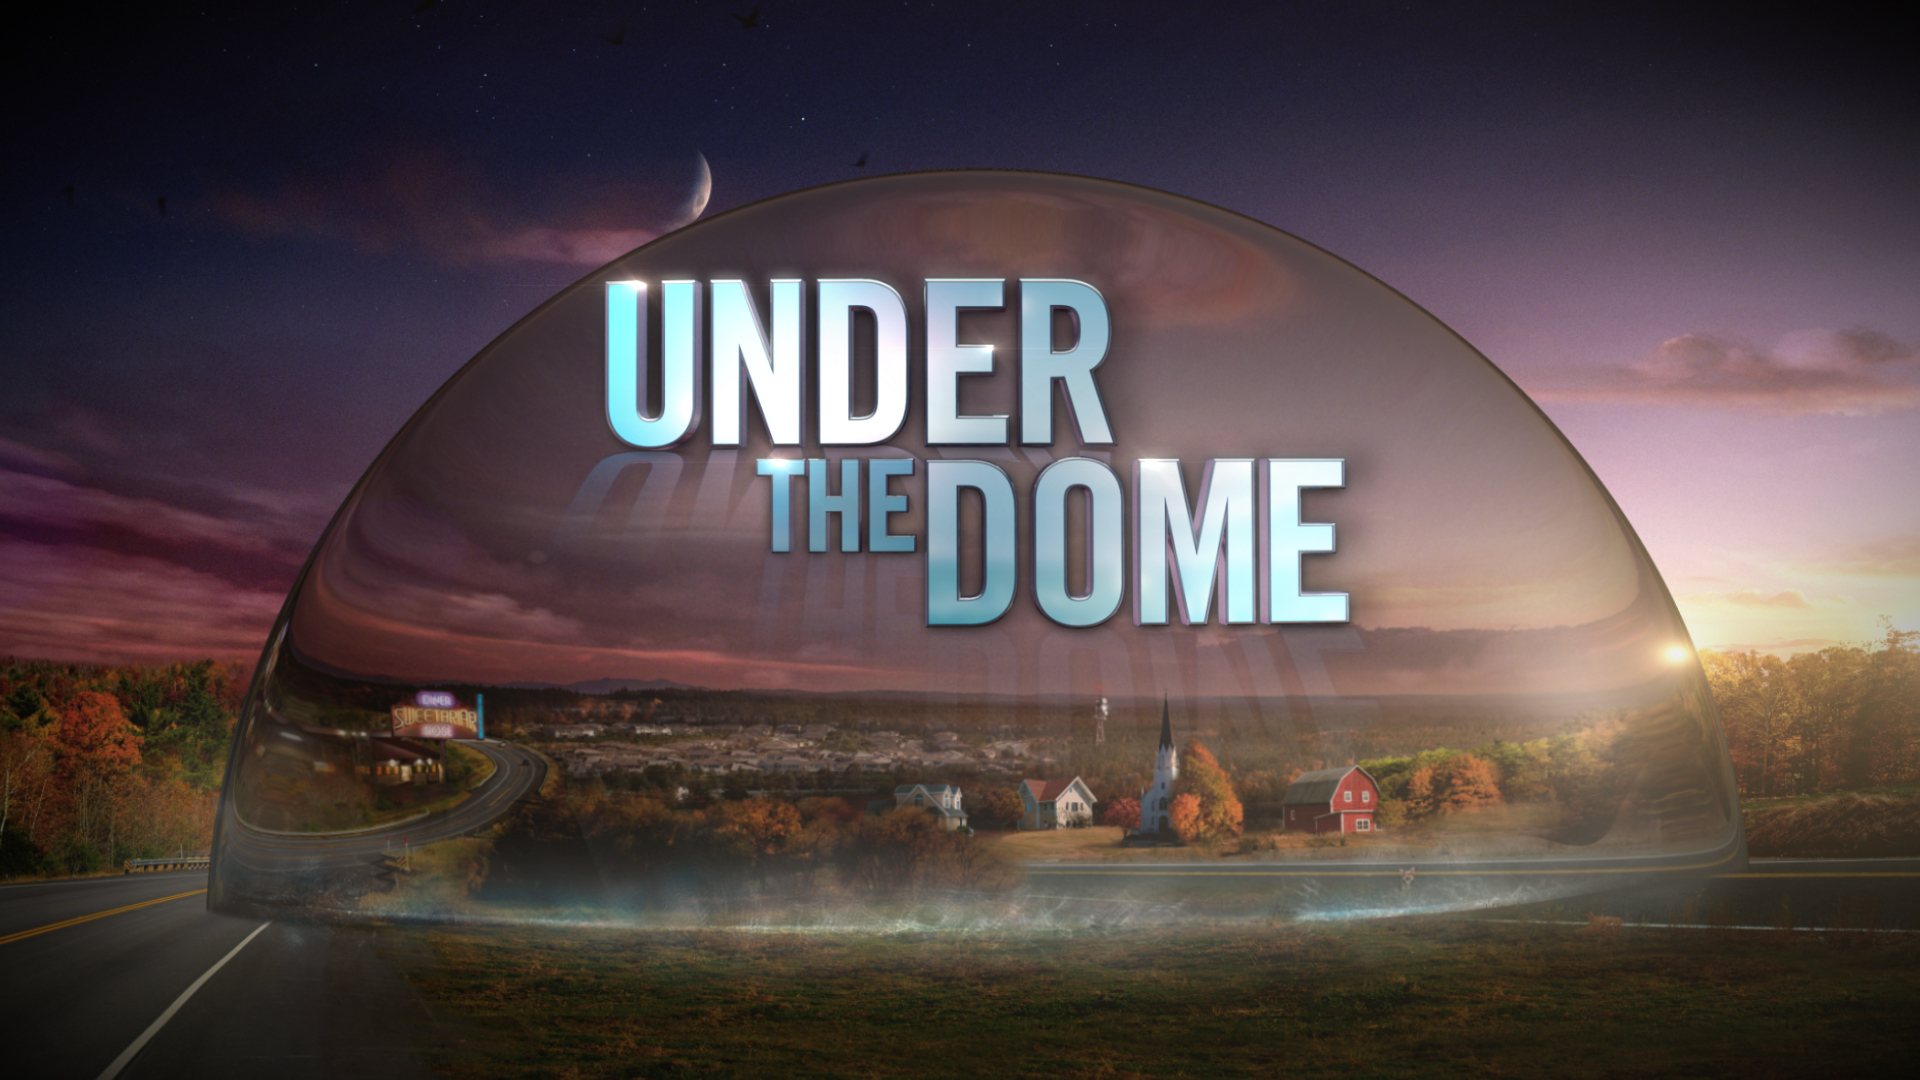 http://images2.wikia.nocookie.net/__cb20130720142460/stephenking/images/6/6e/Under_the_dome_logo.jpg